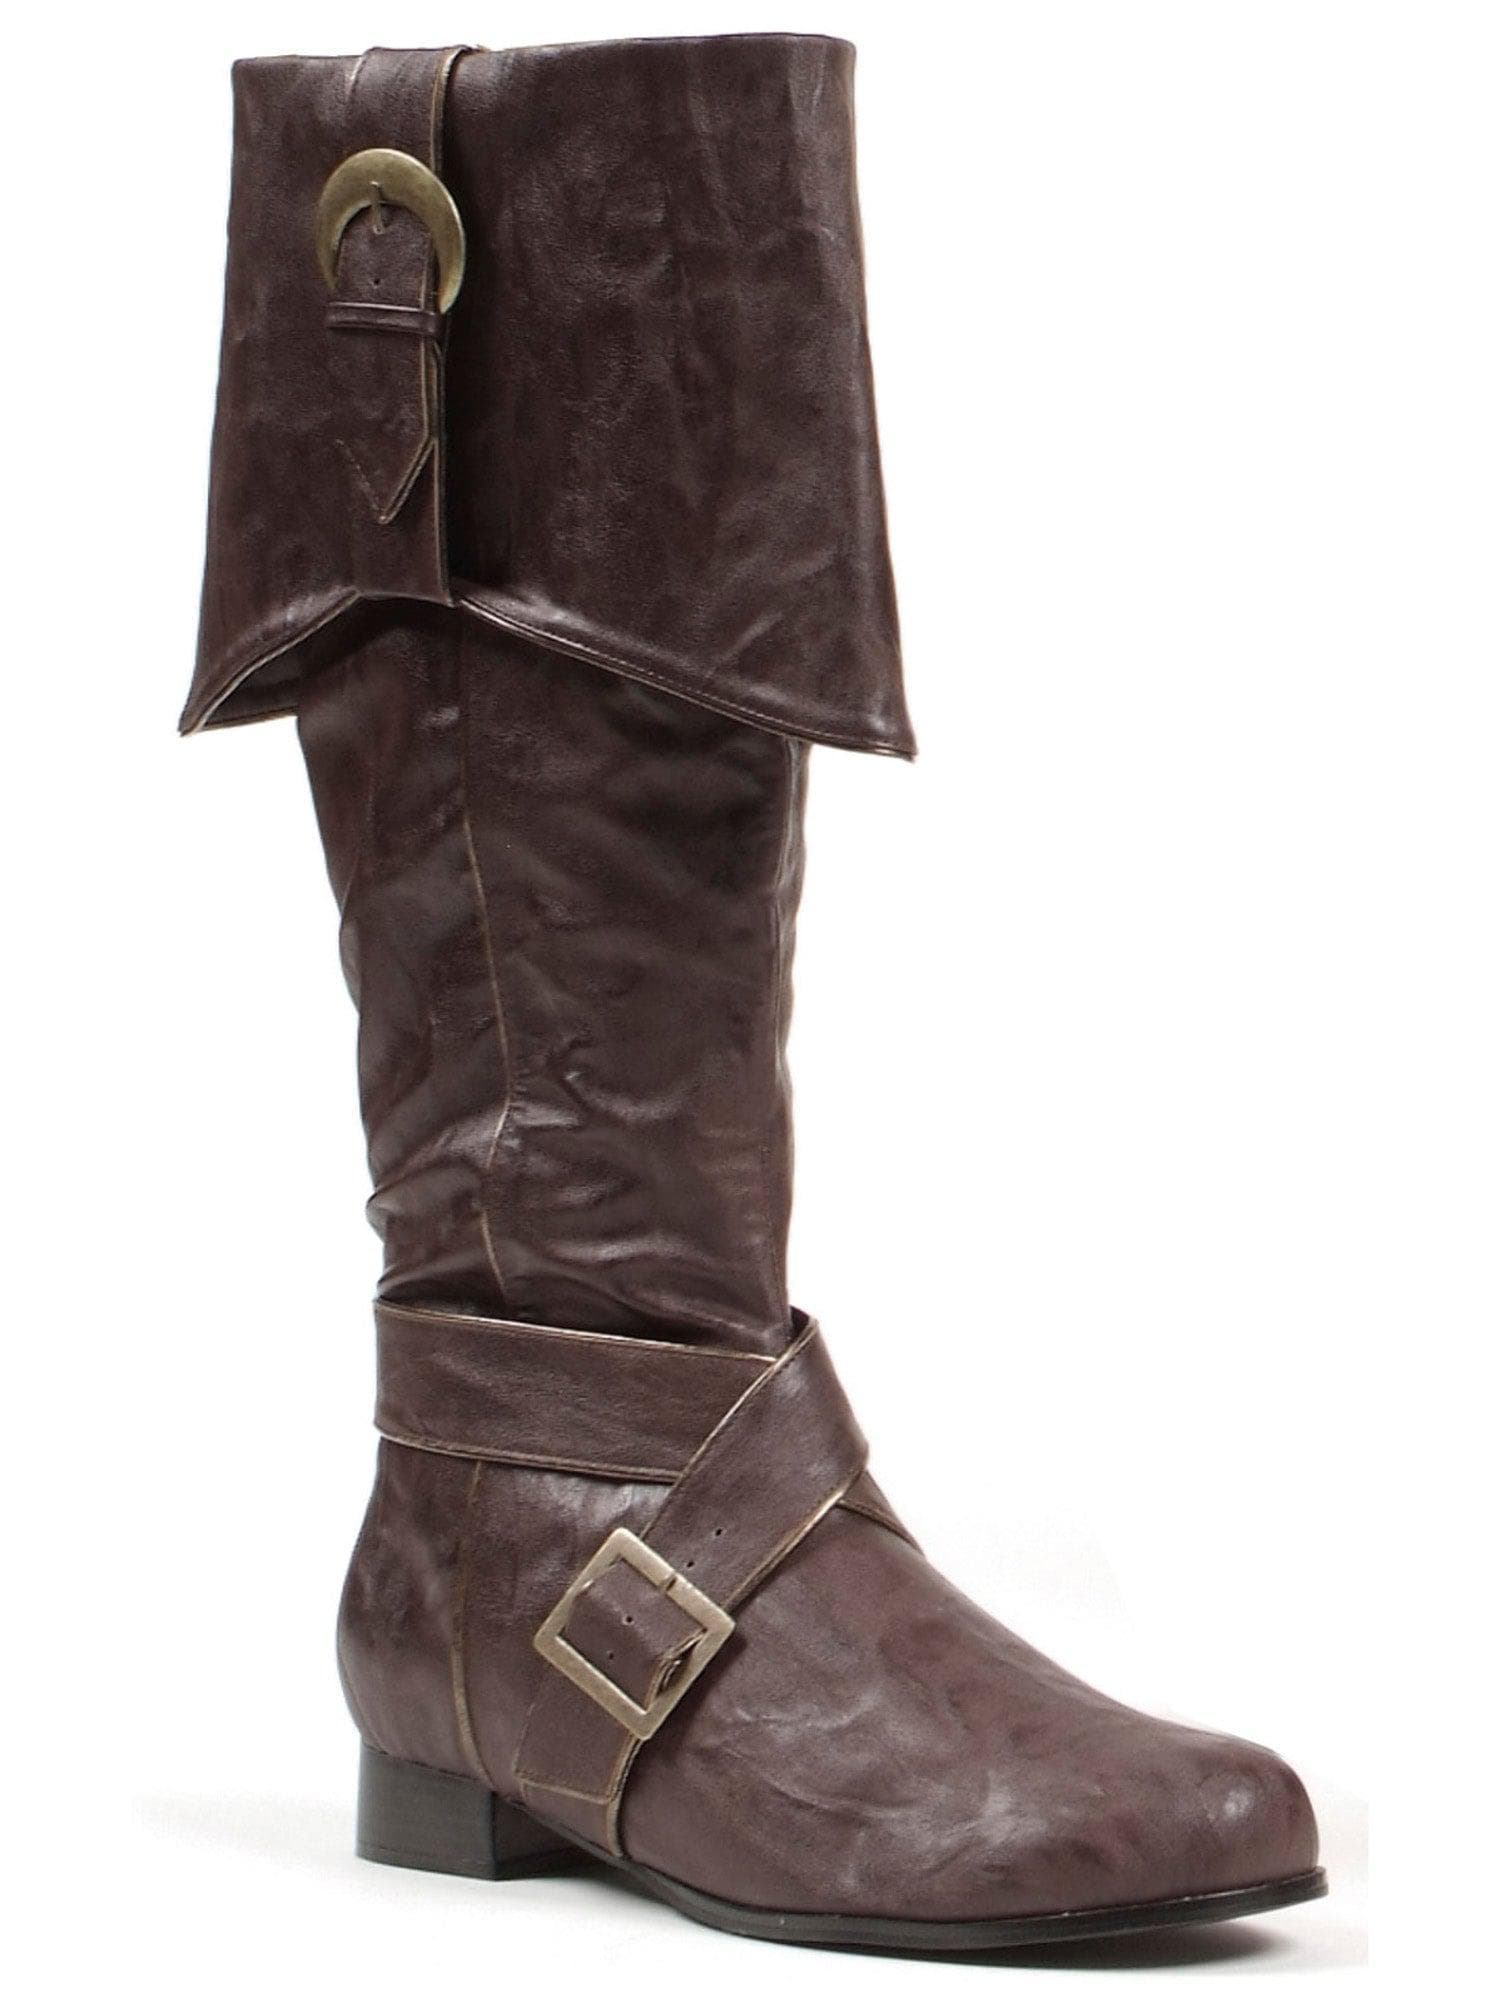 Adult Brown Tall Pirate Buckled Boots - costumes.com